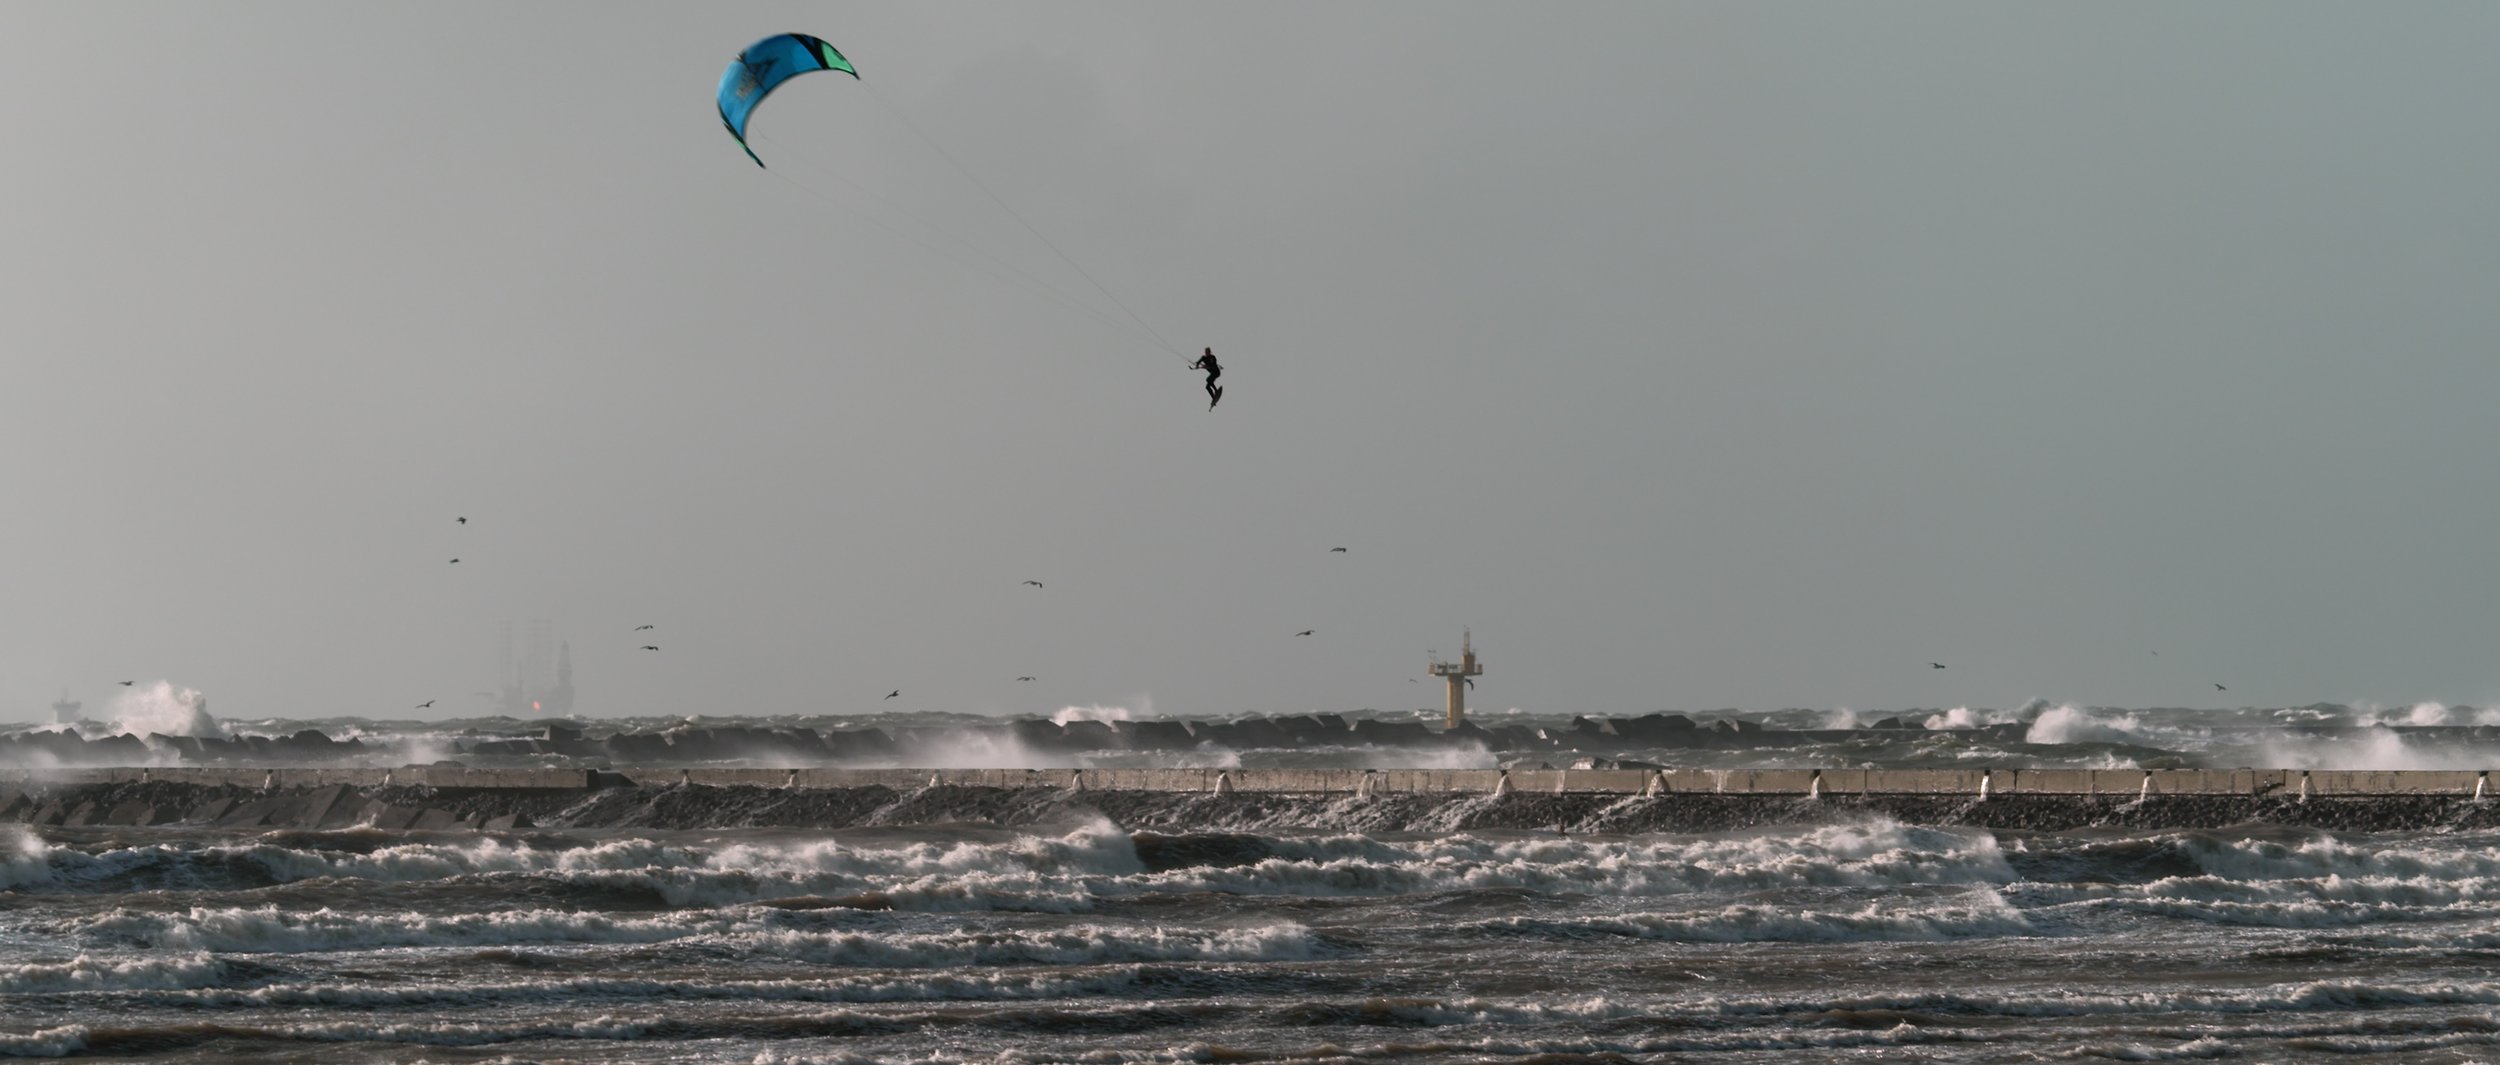 The Good, the Bad and the Ugly - Kiteboarding in Holland.00_14_11_05.Still056.jpg